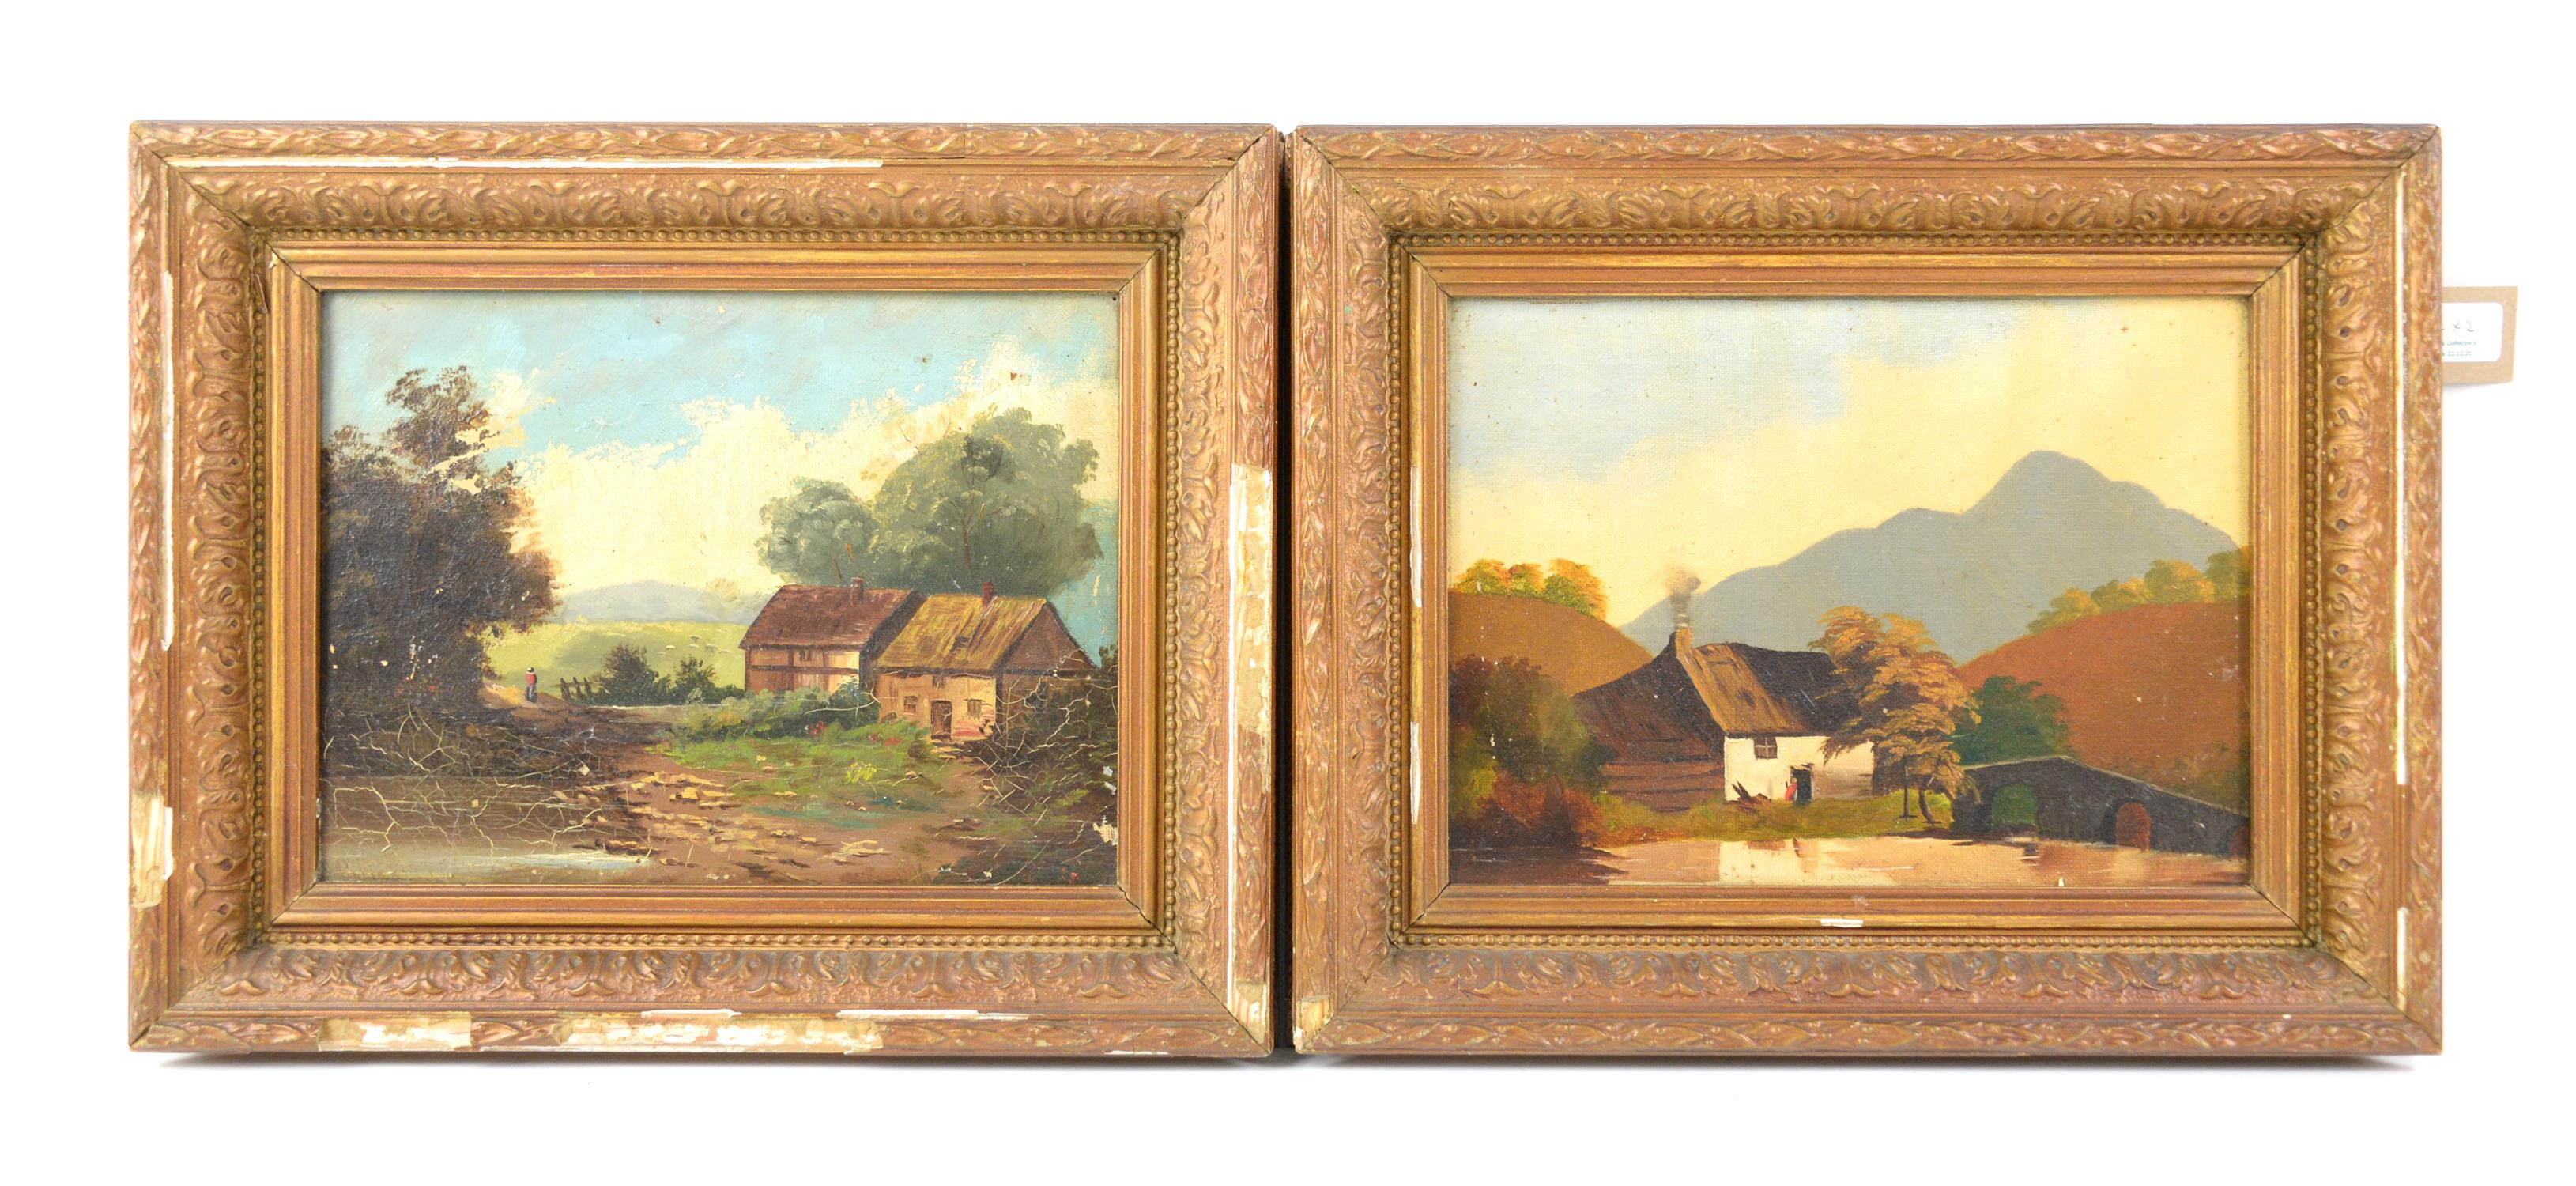 Nineteenth-century English School, pair of framed oil on canvas landscapes. Image size 21 x 28cm